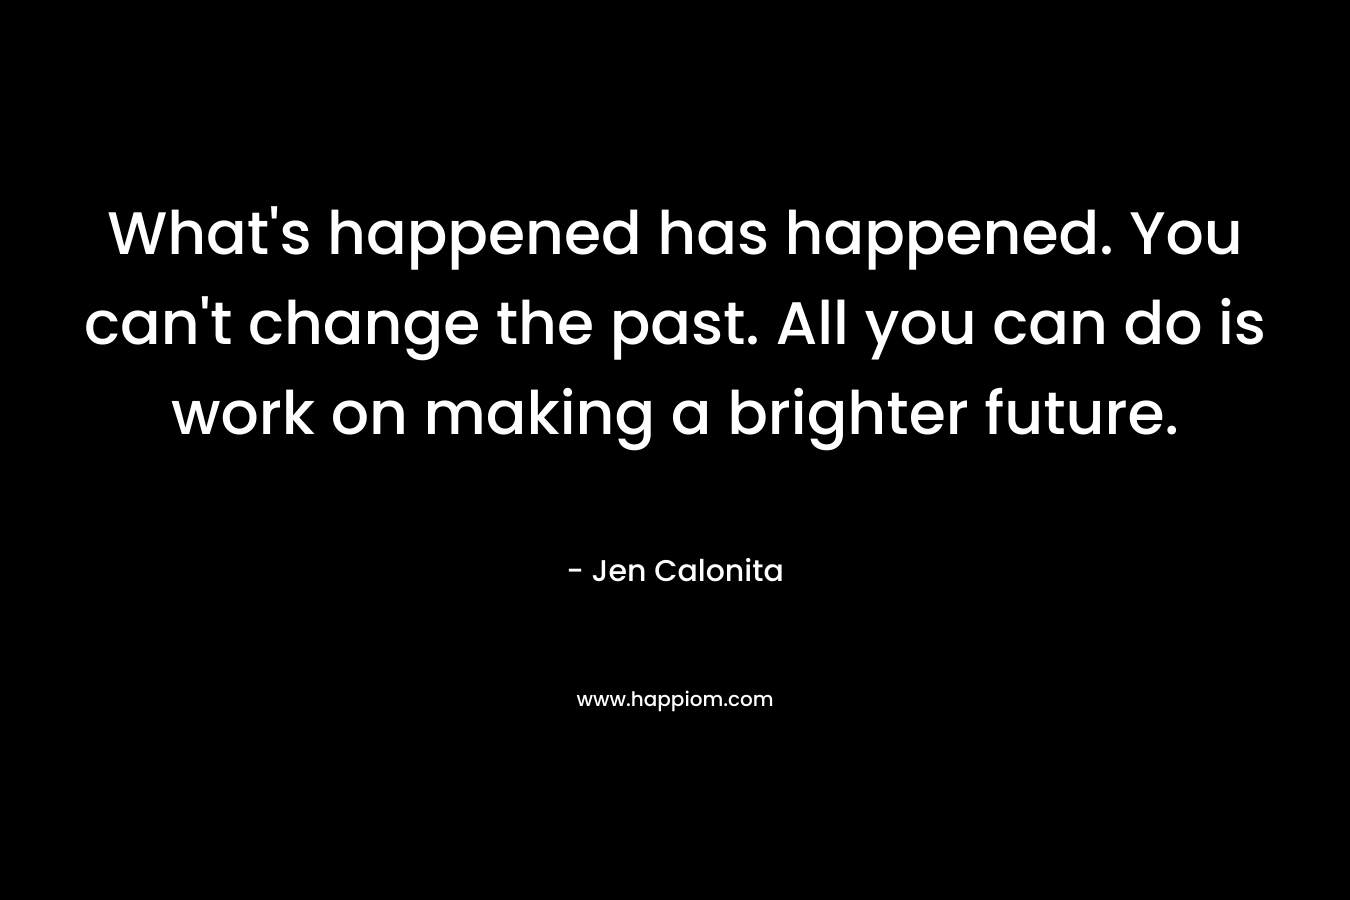 What's happened has happened. You can't change the past. All you can do is work on making a brighter future.